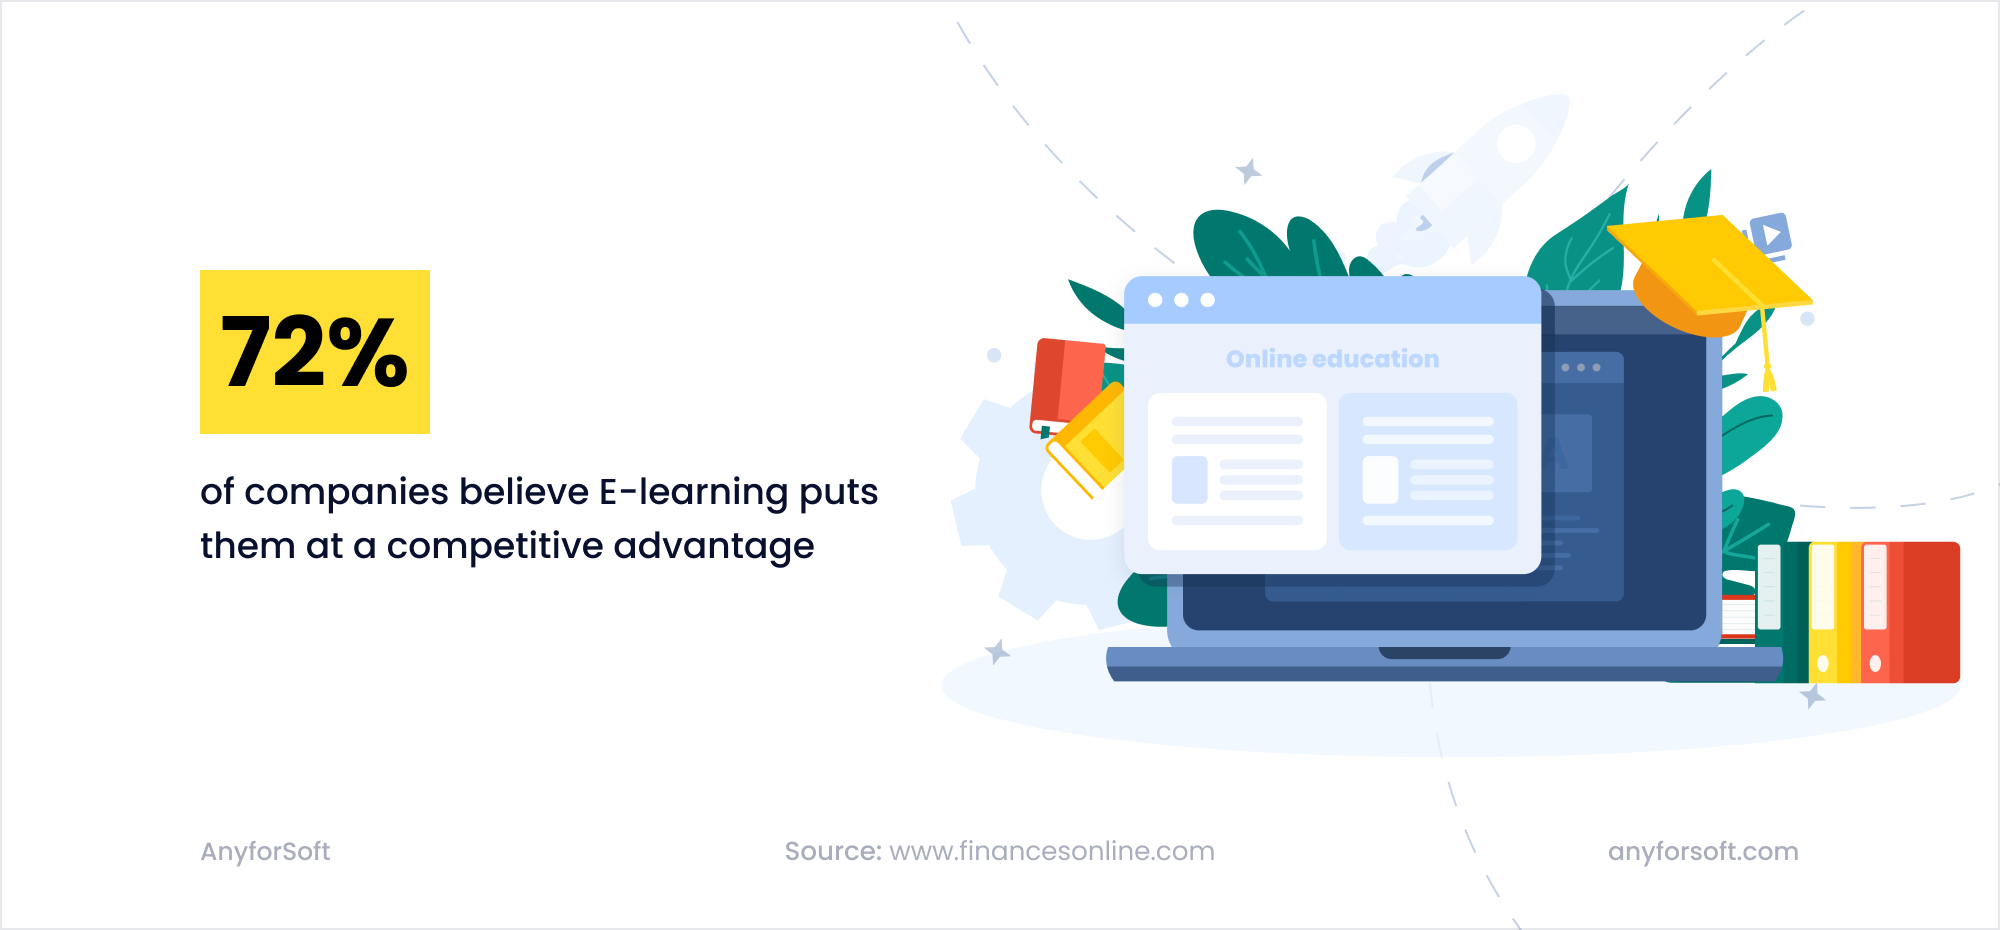 72% of companies consider E-learning as a competitive advantage 